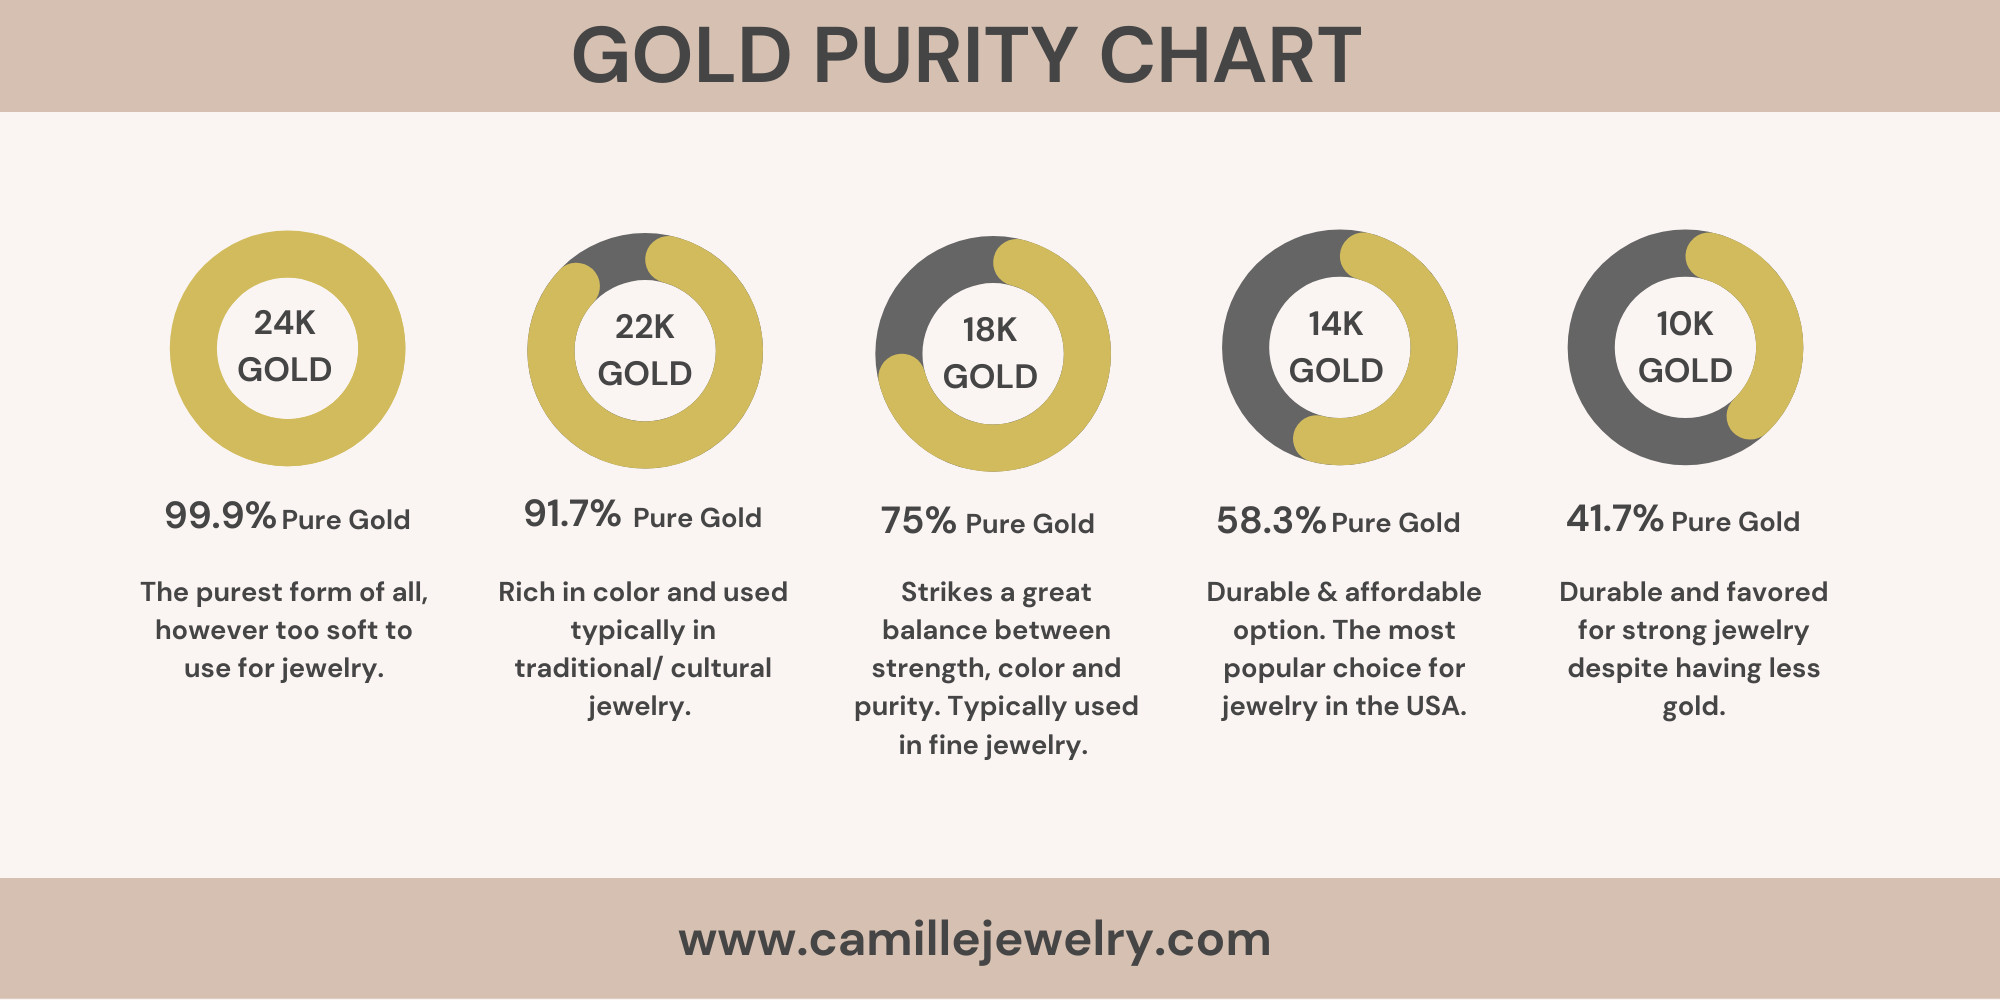 Gold Purity Chart | Camille Jewelry